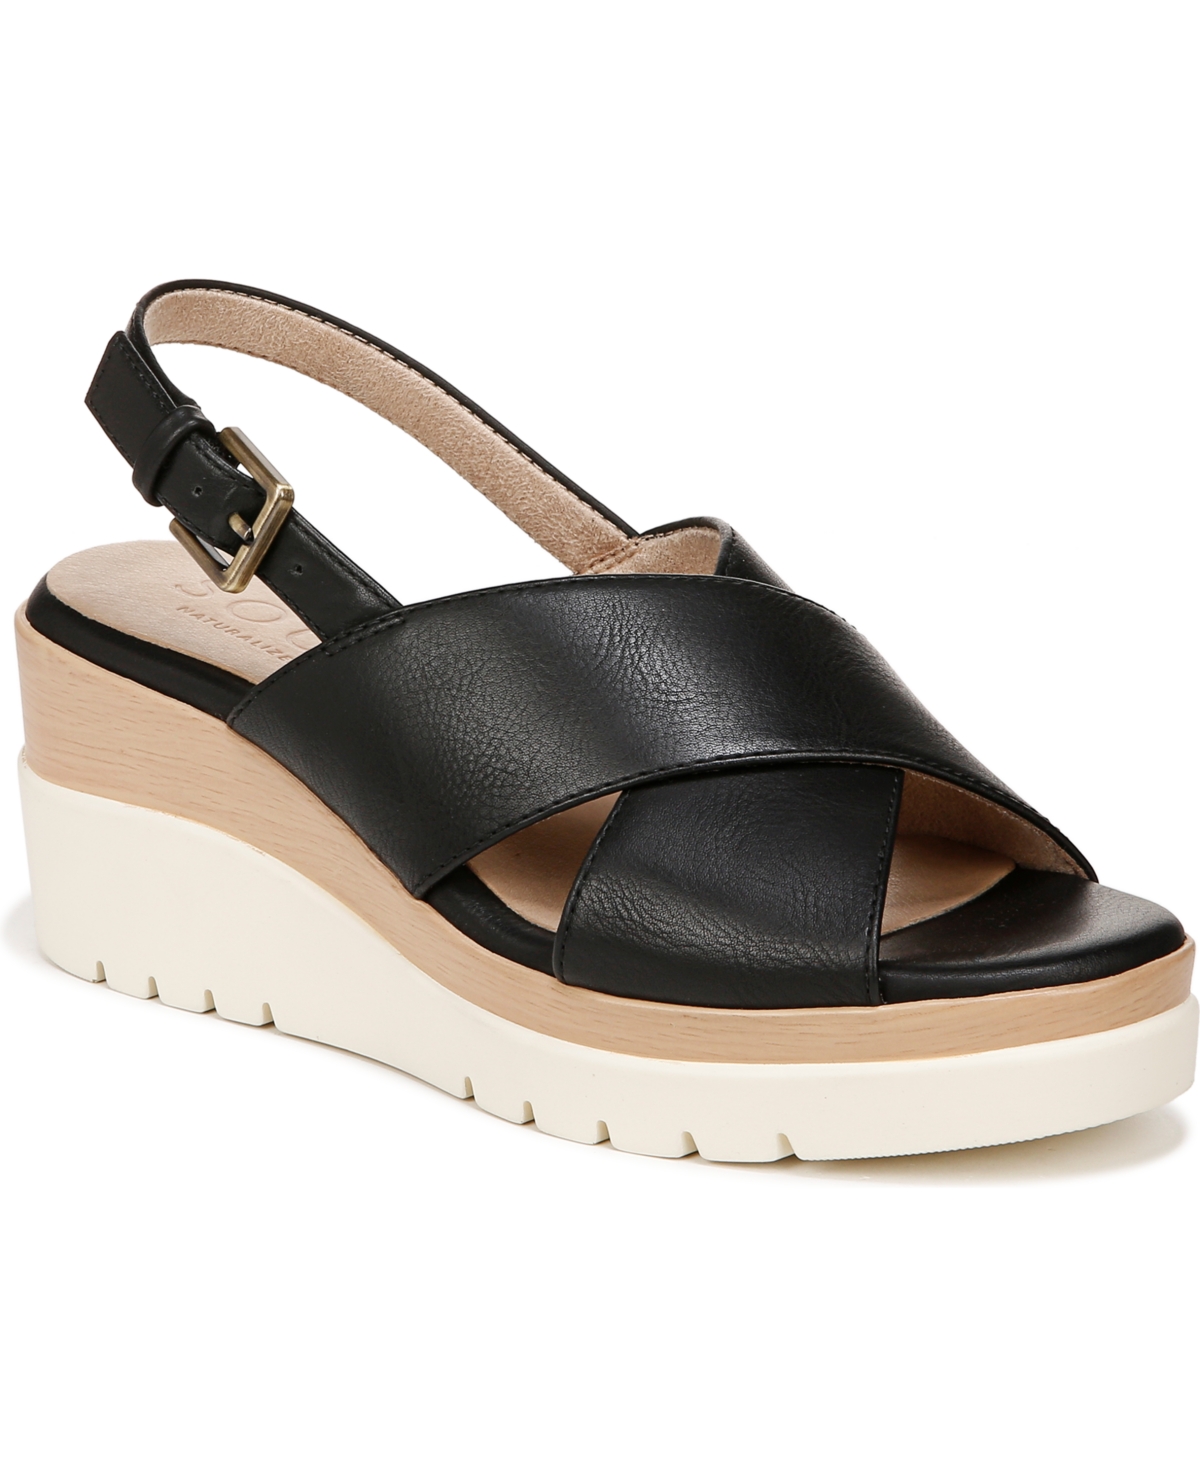 Goodtimes-Sling Wedge Sandals - Porcelain Faux Leather